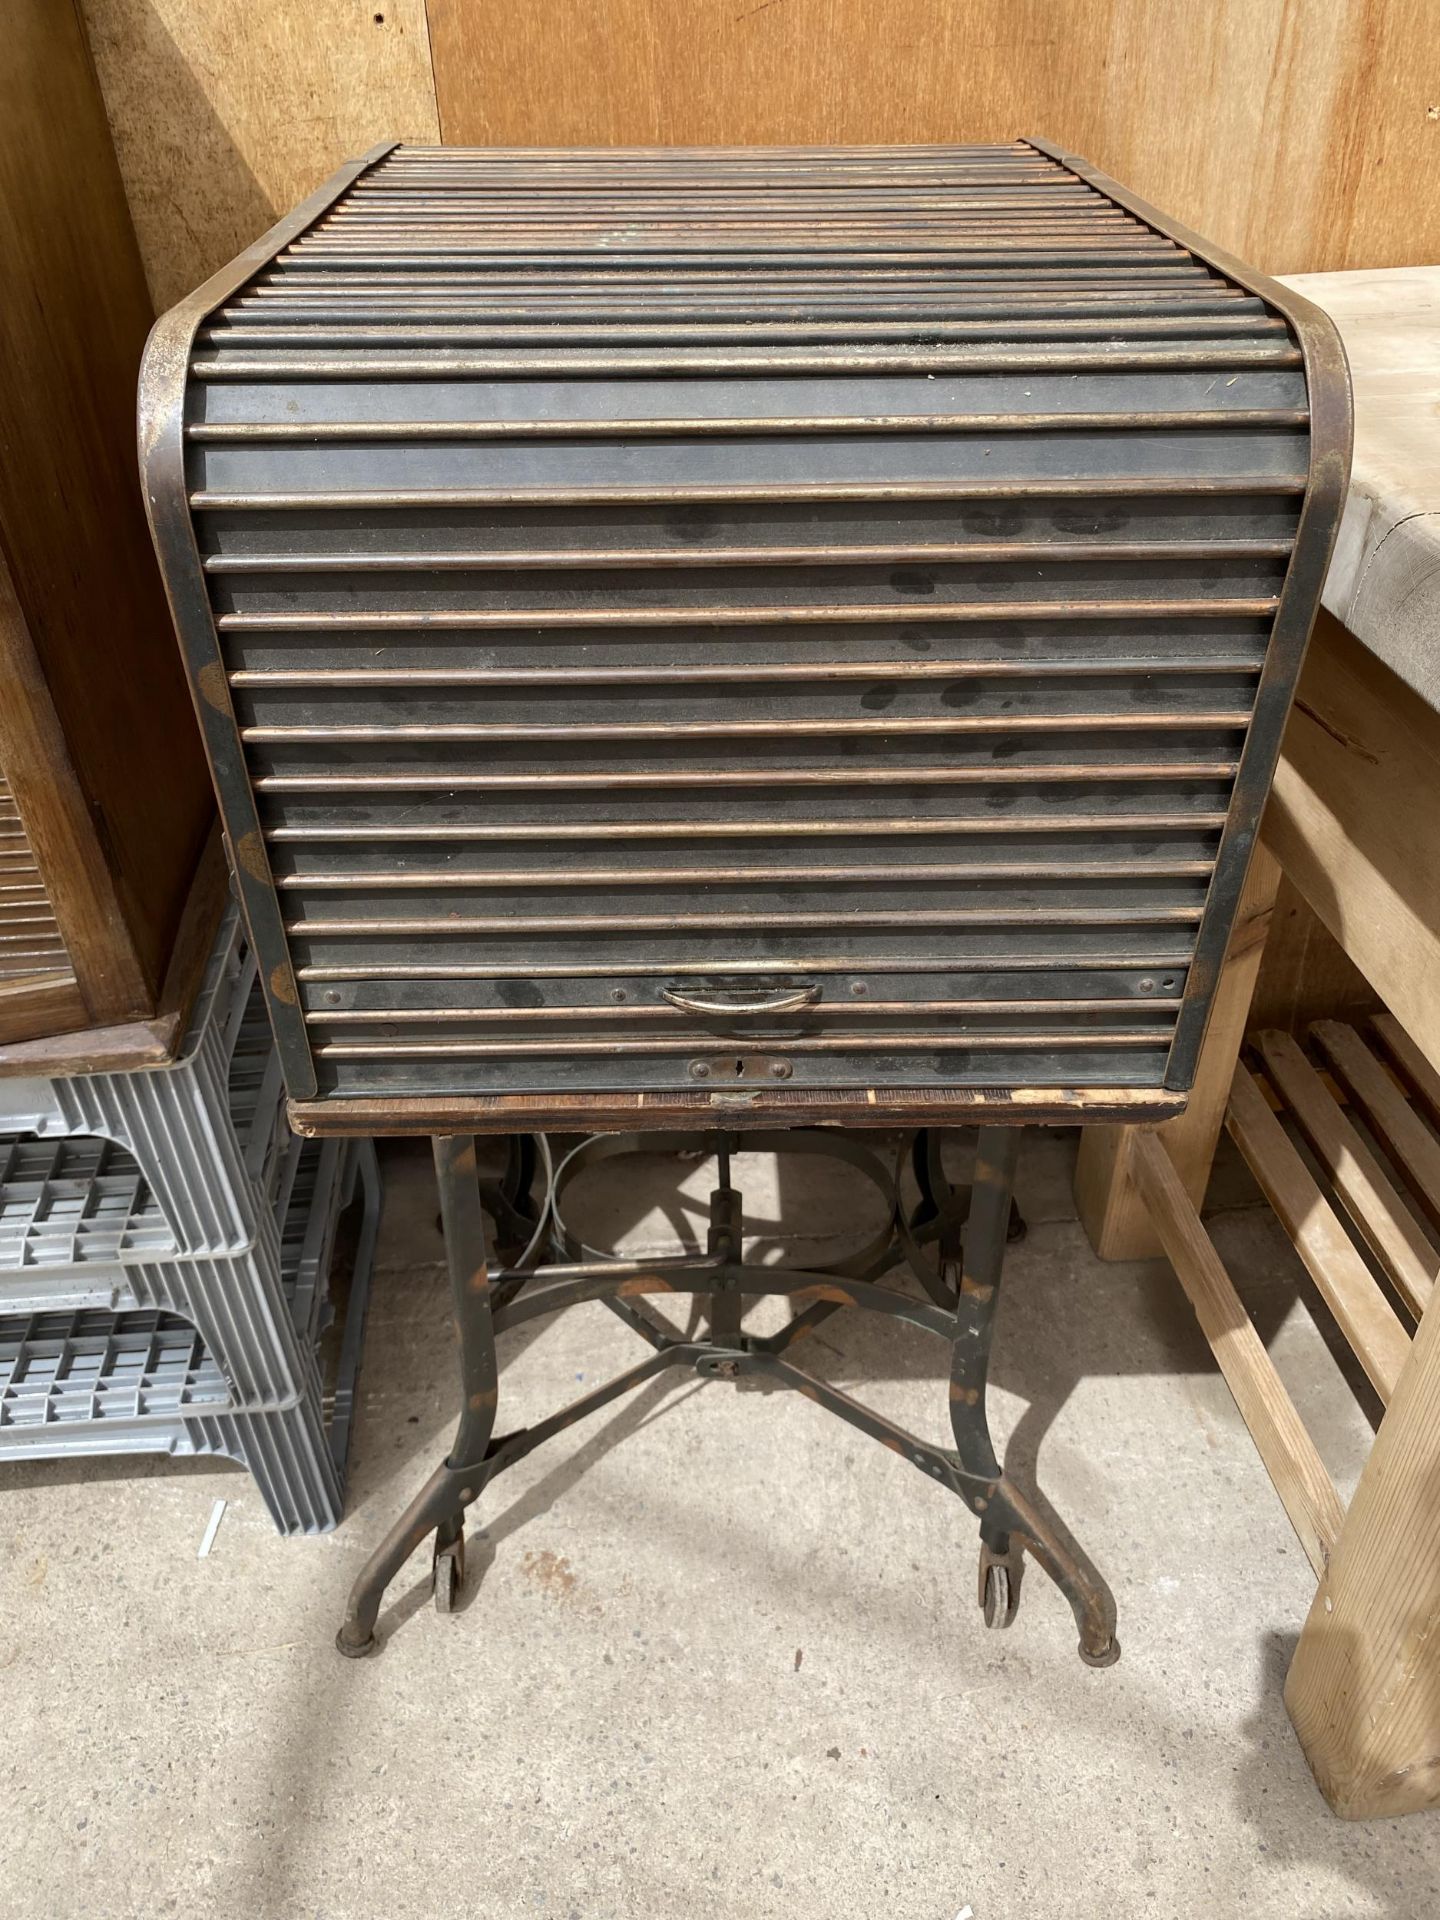 A VINTAGE OAK ROLL MACHINE TYPISTS CABINET WITH METAL INDUSTRIAL BASE